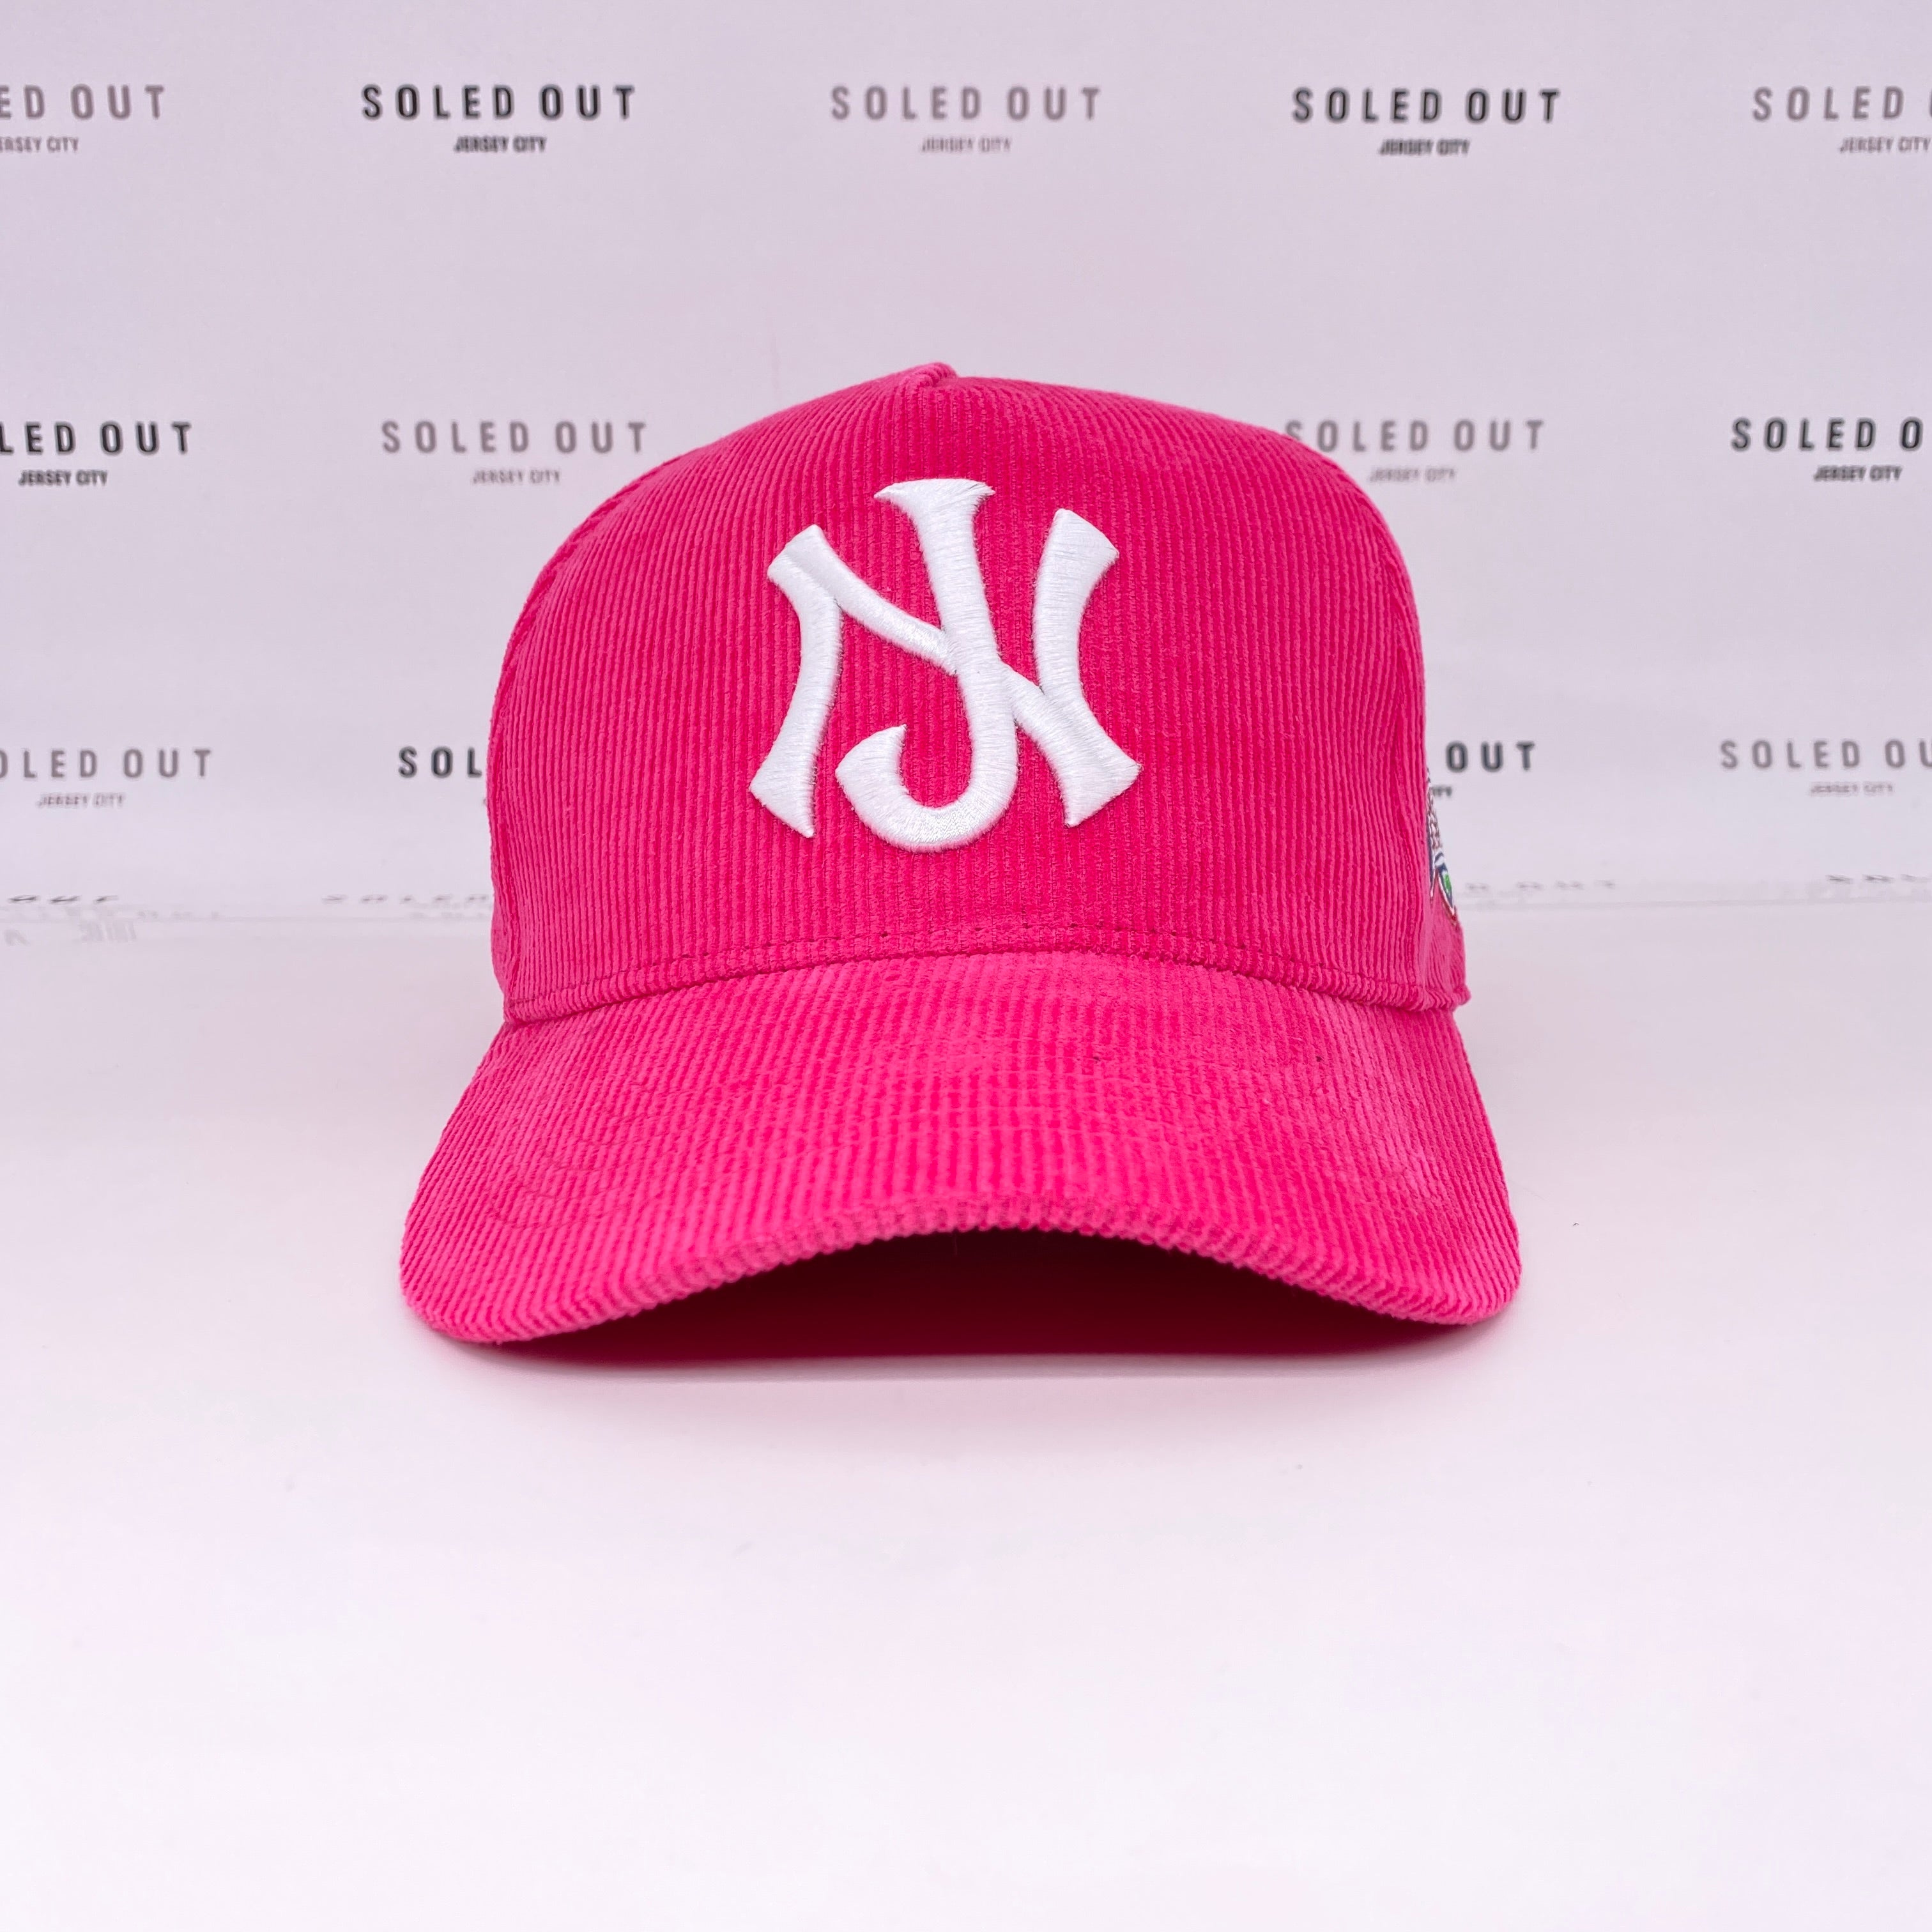 Soled Out Snapback "CORDUROY HOT PINK" 2022 New Size OS